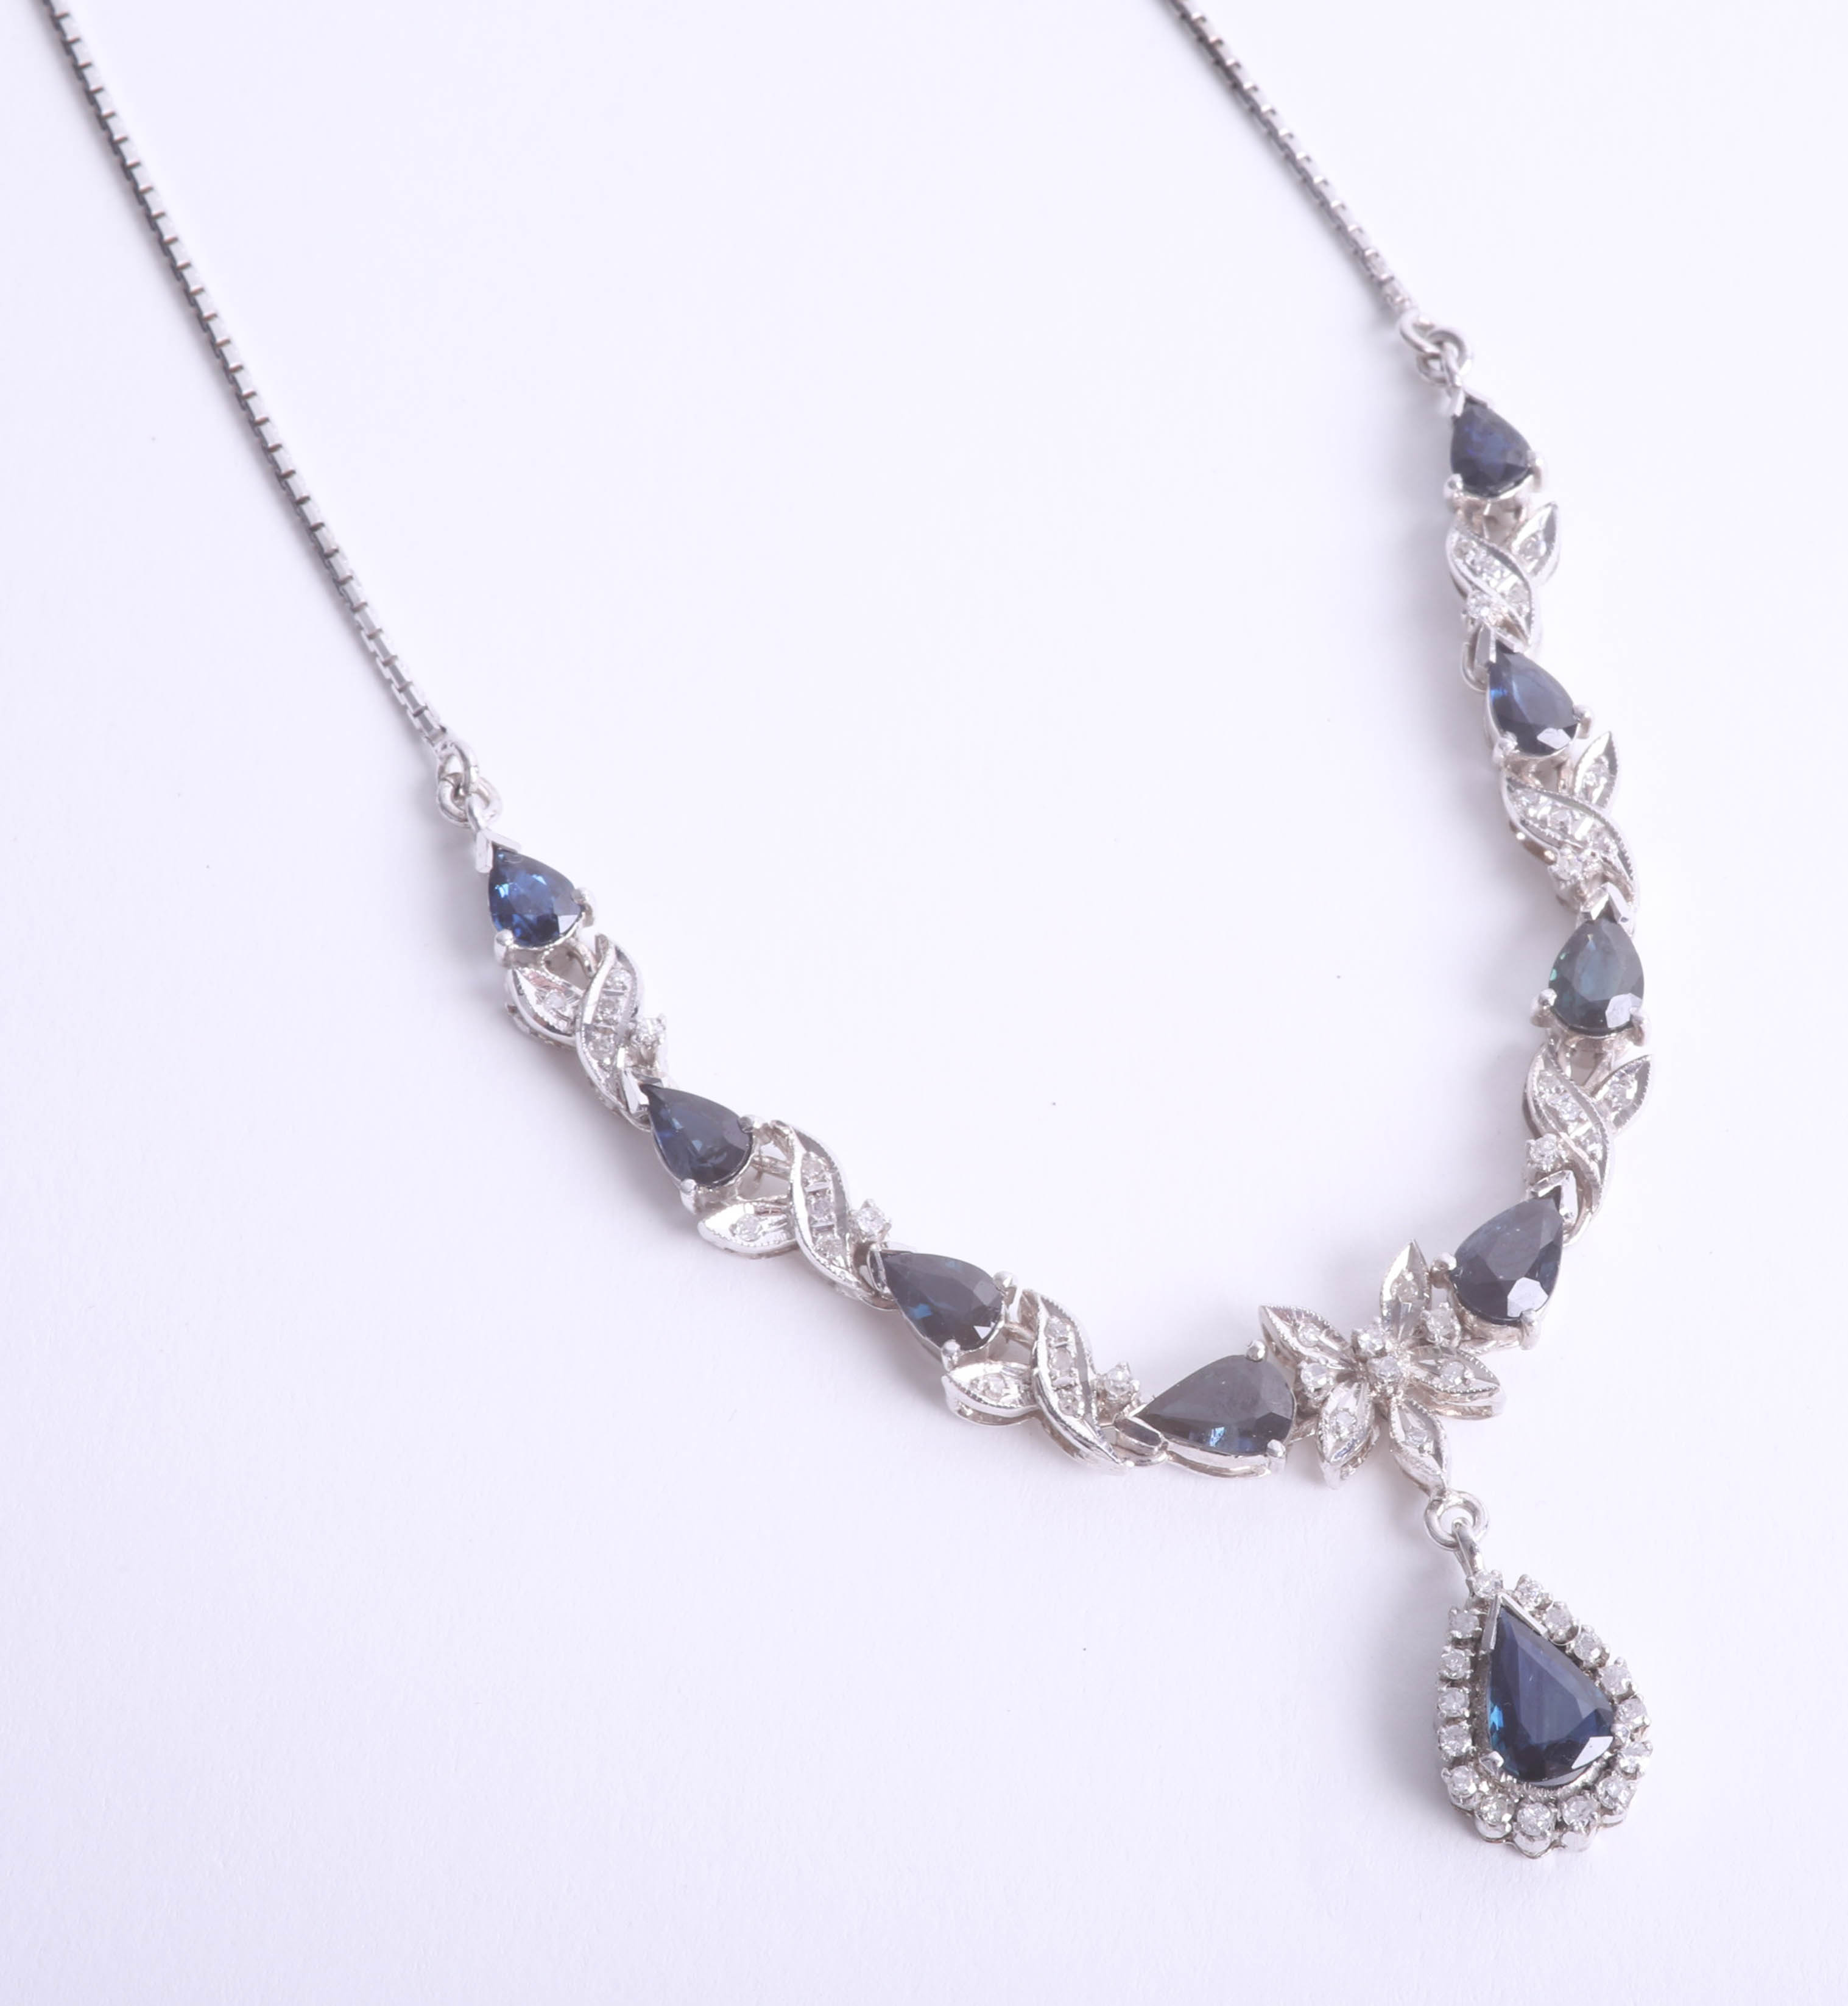 An 18ct white gold necklace set with diamonds and sapphires with drop pendant, length of main